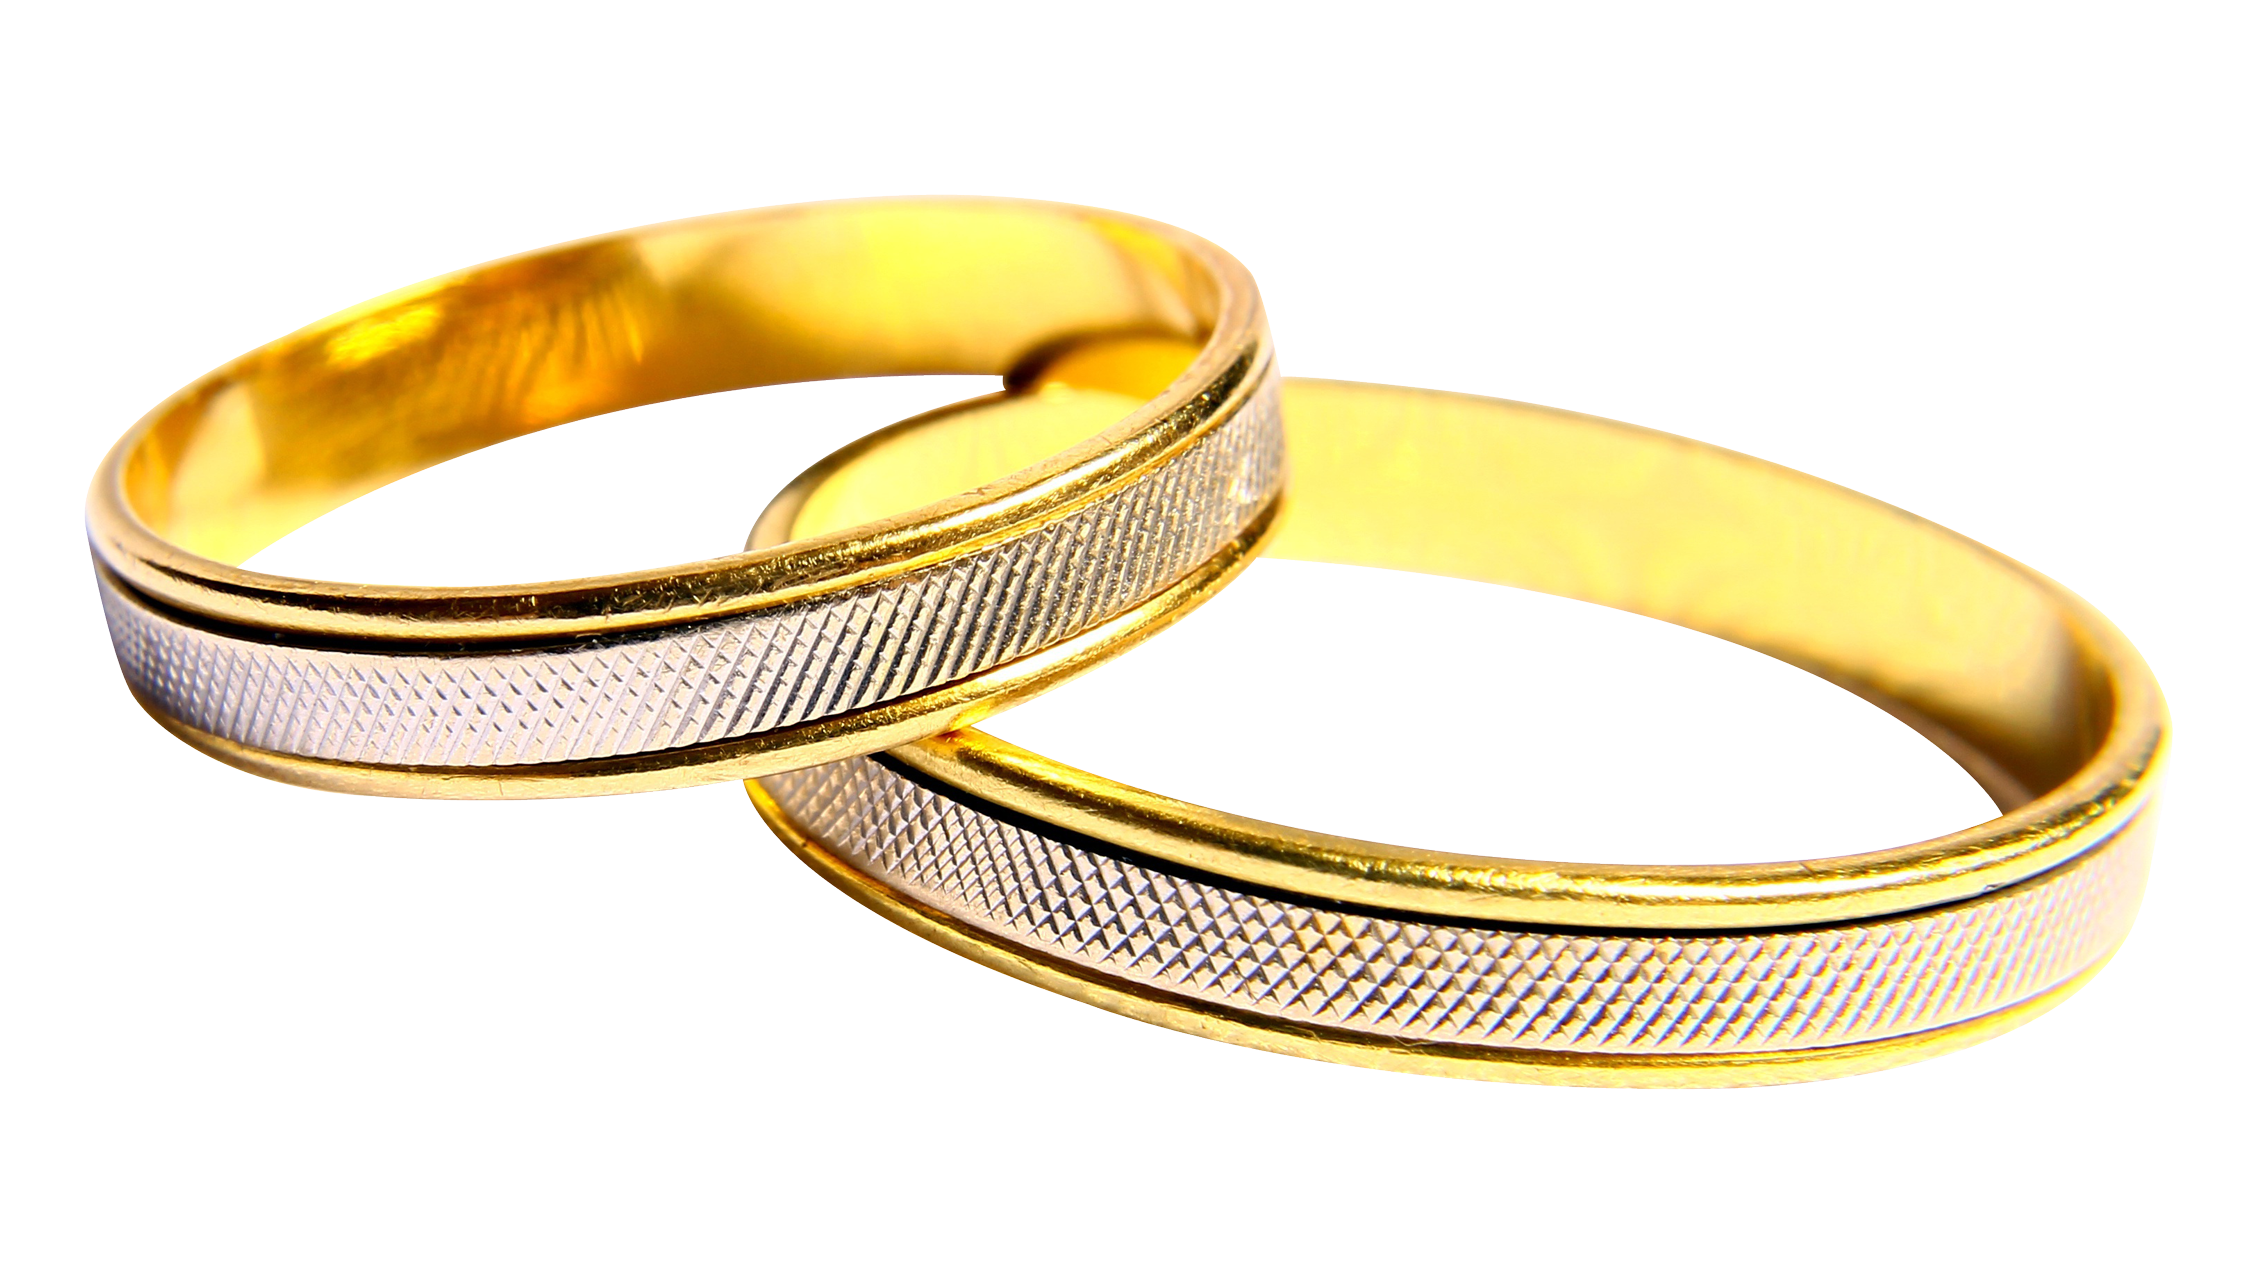 Gold embroidered wedding ring png #45269.